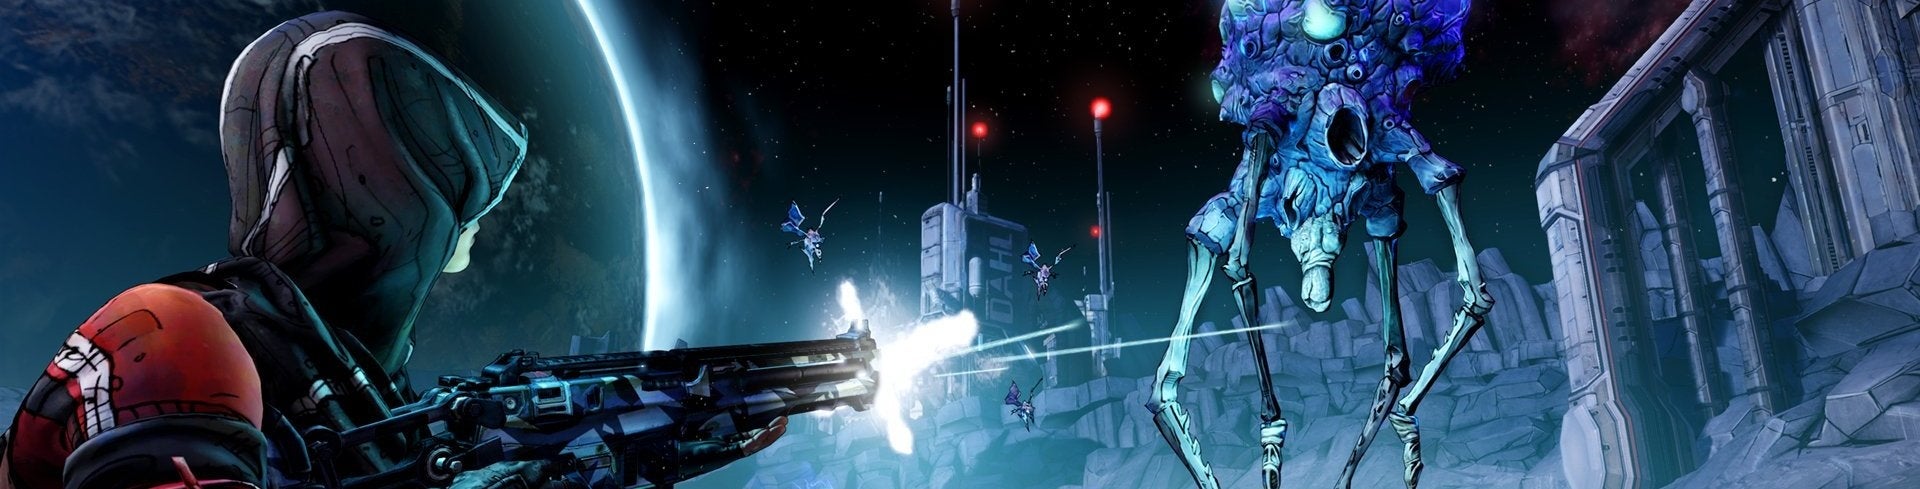 Image for Borderlands: The Pre-Sequel review